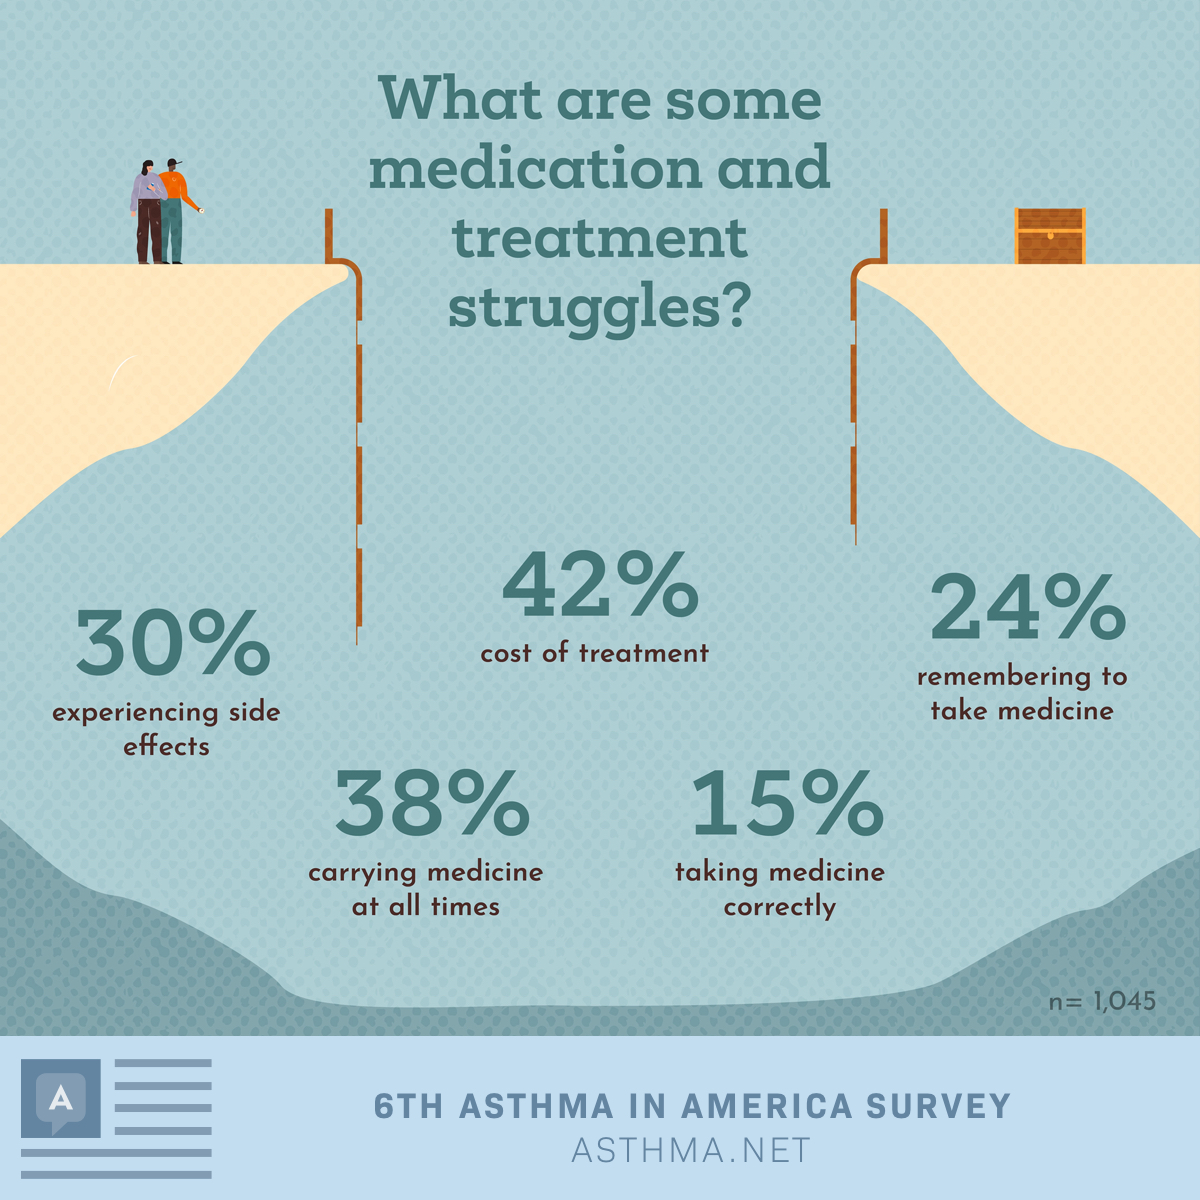 Medicine and treatment struggles included 30% experiencing side effects, 42% cost of treatment, 38% carrying medicines/inhalers at all times, 15% taking medicine/inhaler correctly, 24% remembering to take medicine/inhaler.